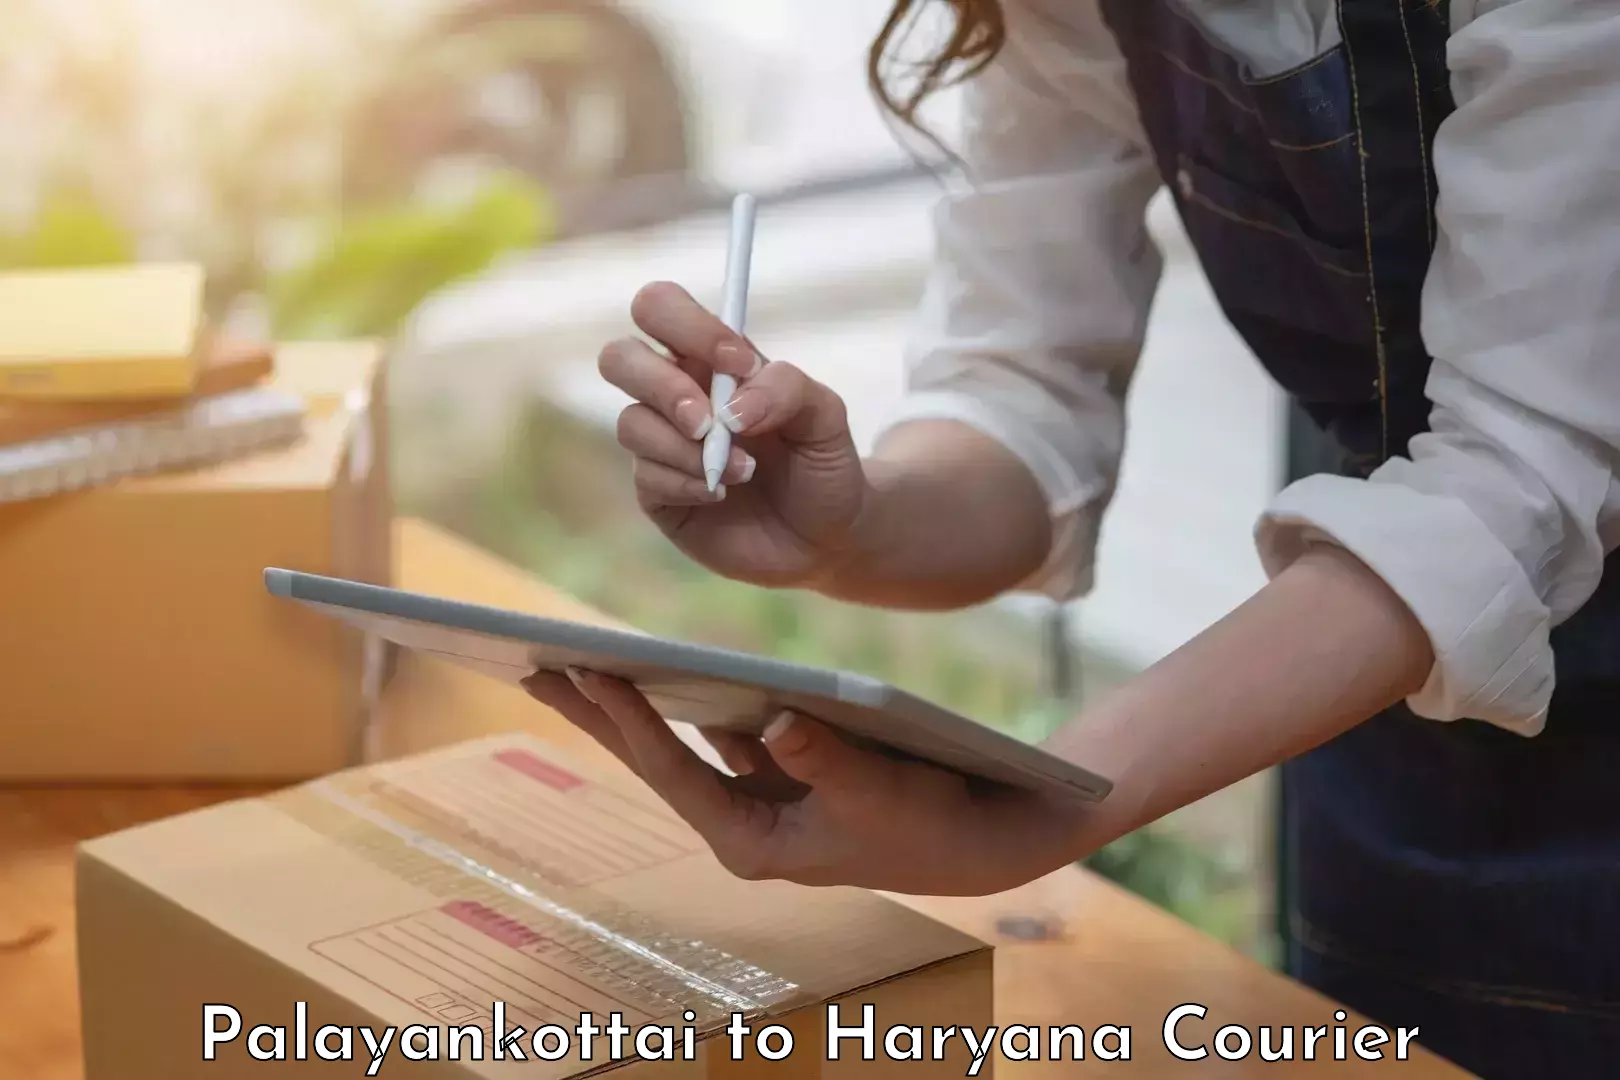 Trusted relocation experts Palayankottai to Haryana